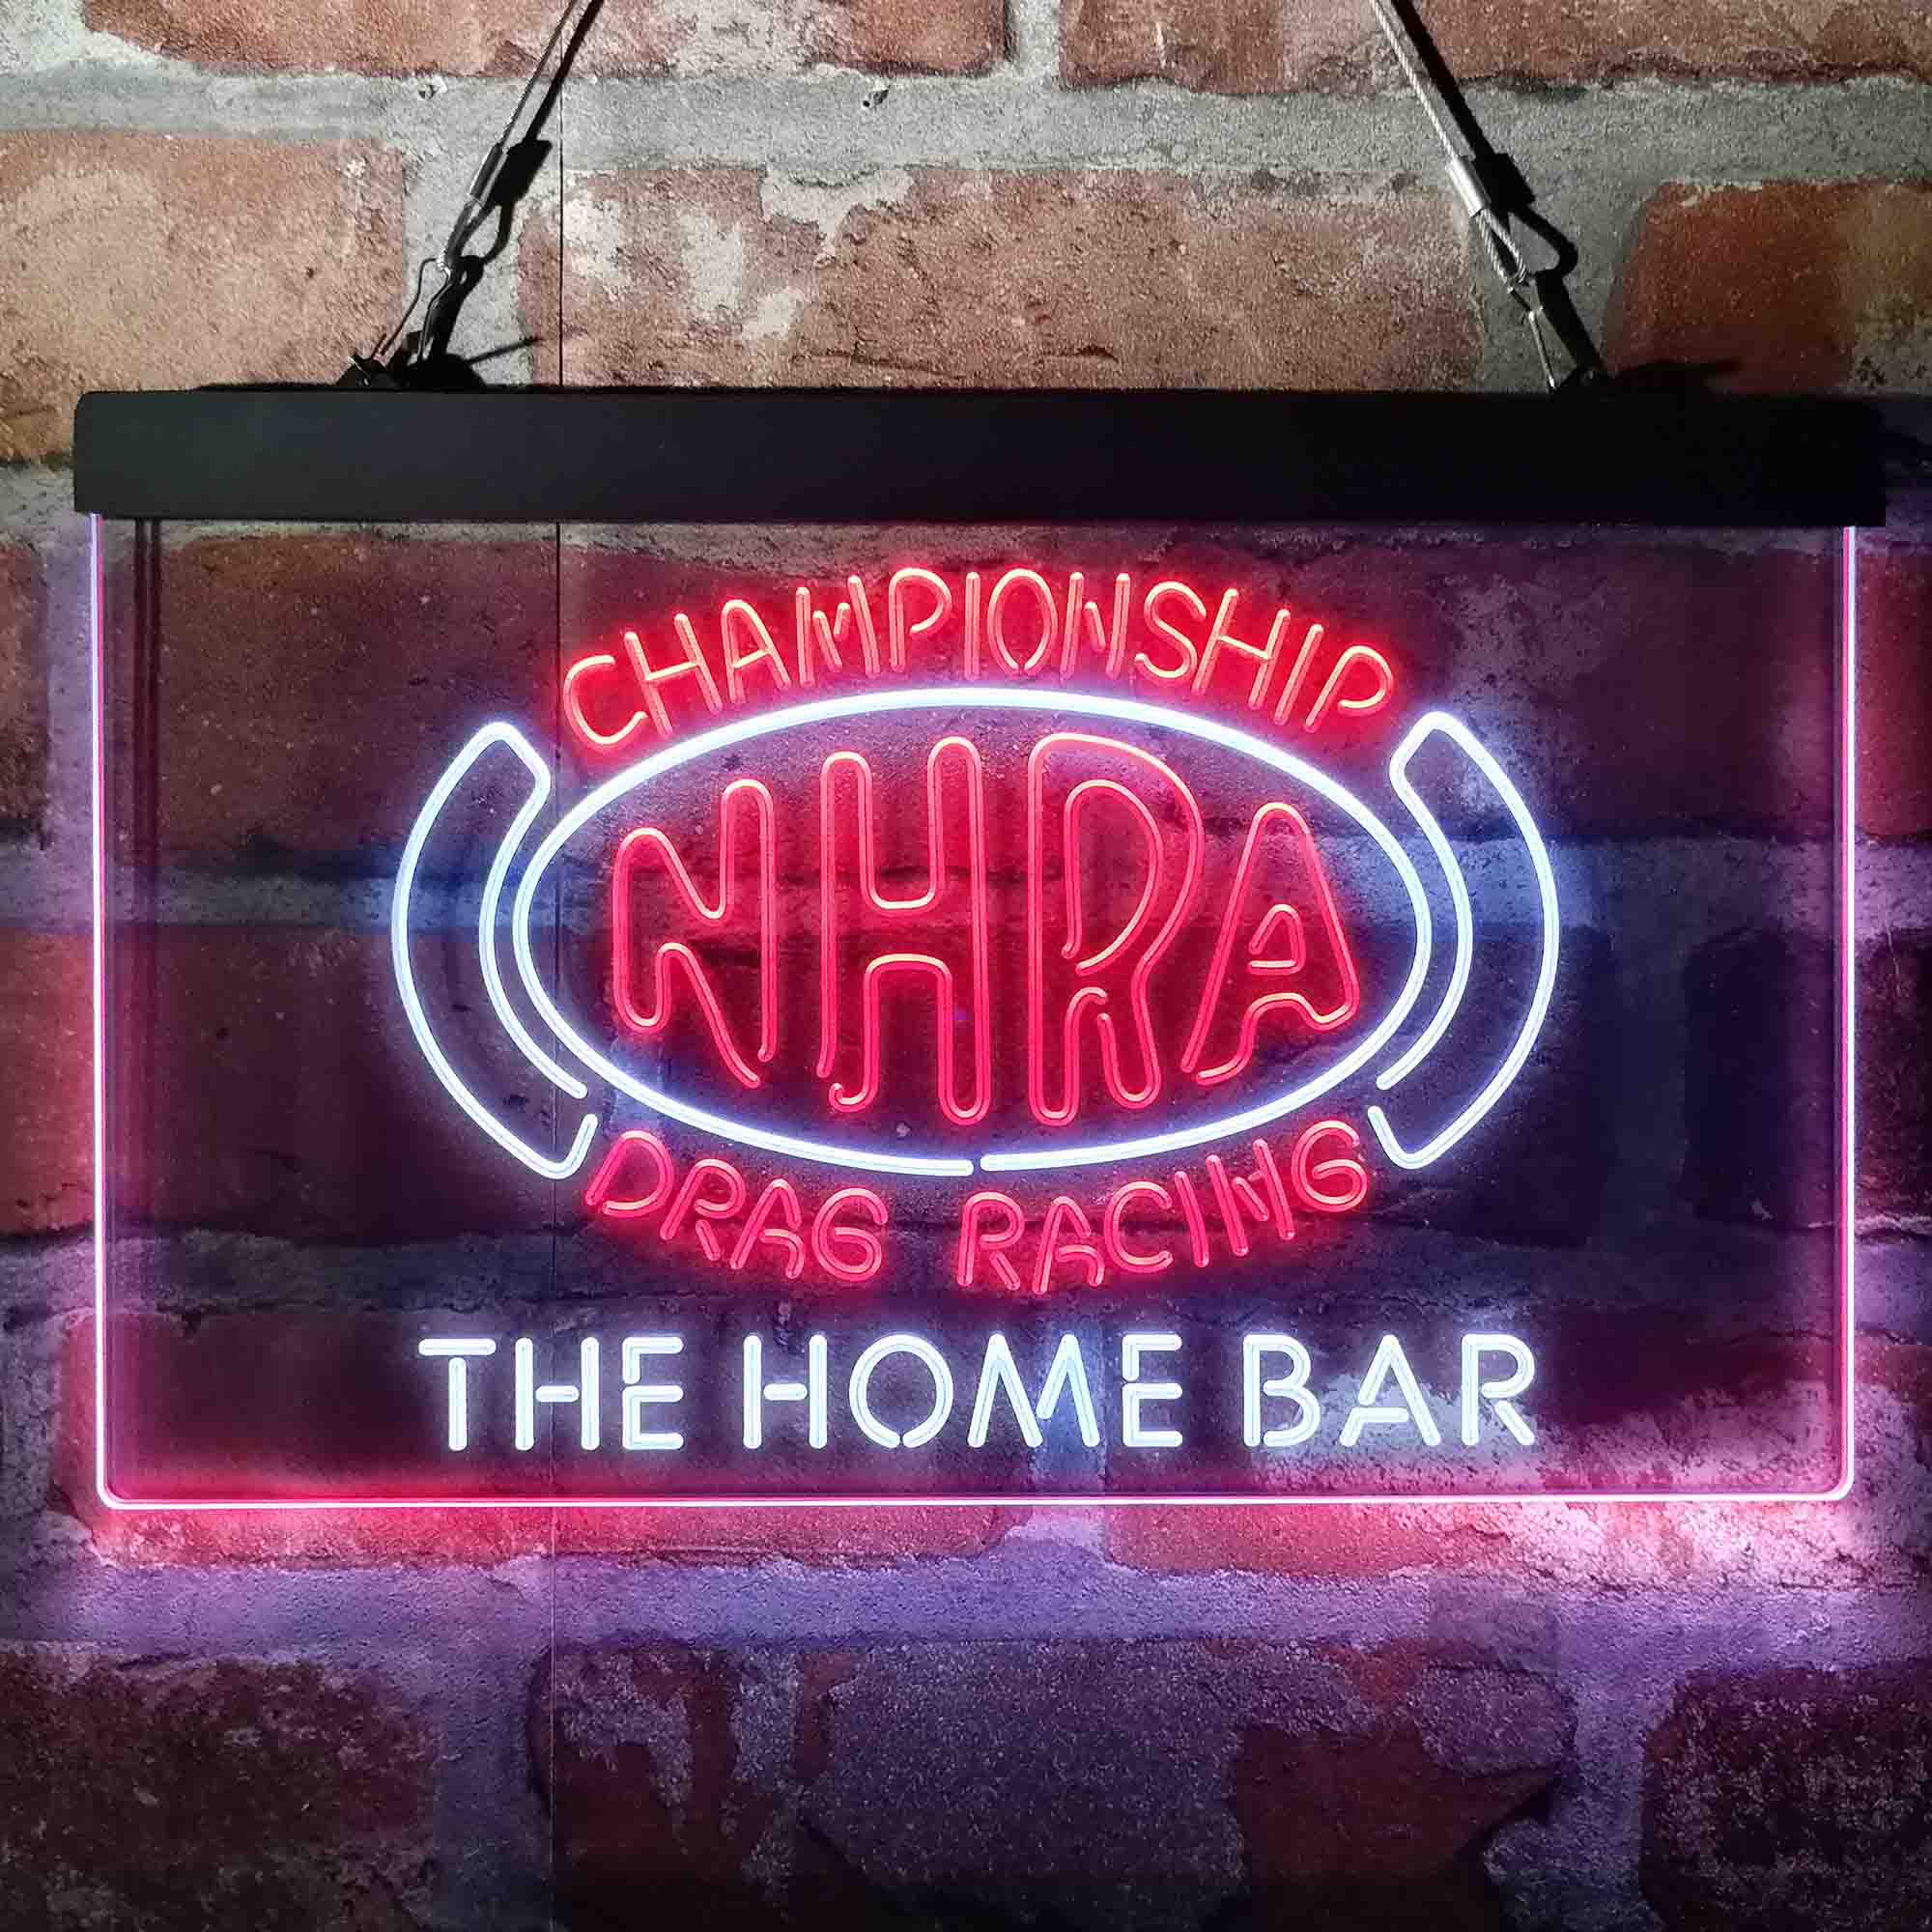 Personalized NHRA Drags Racing Neon-Like LED Sign - Custom Wall Decor Gift